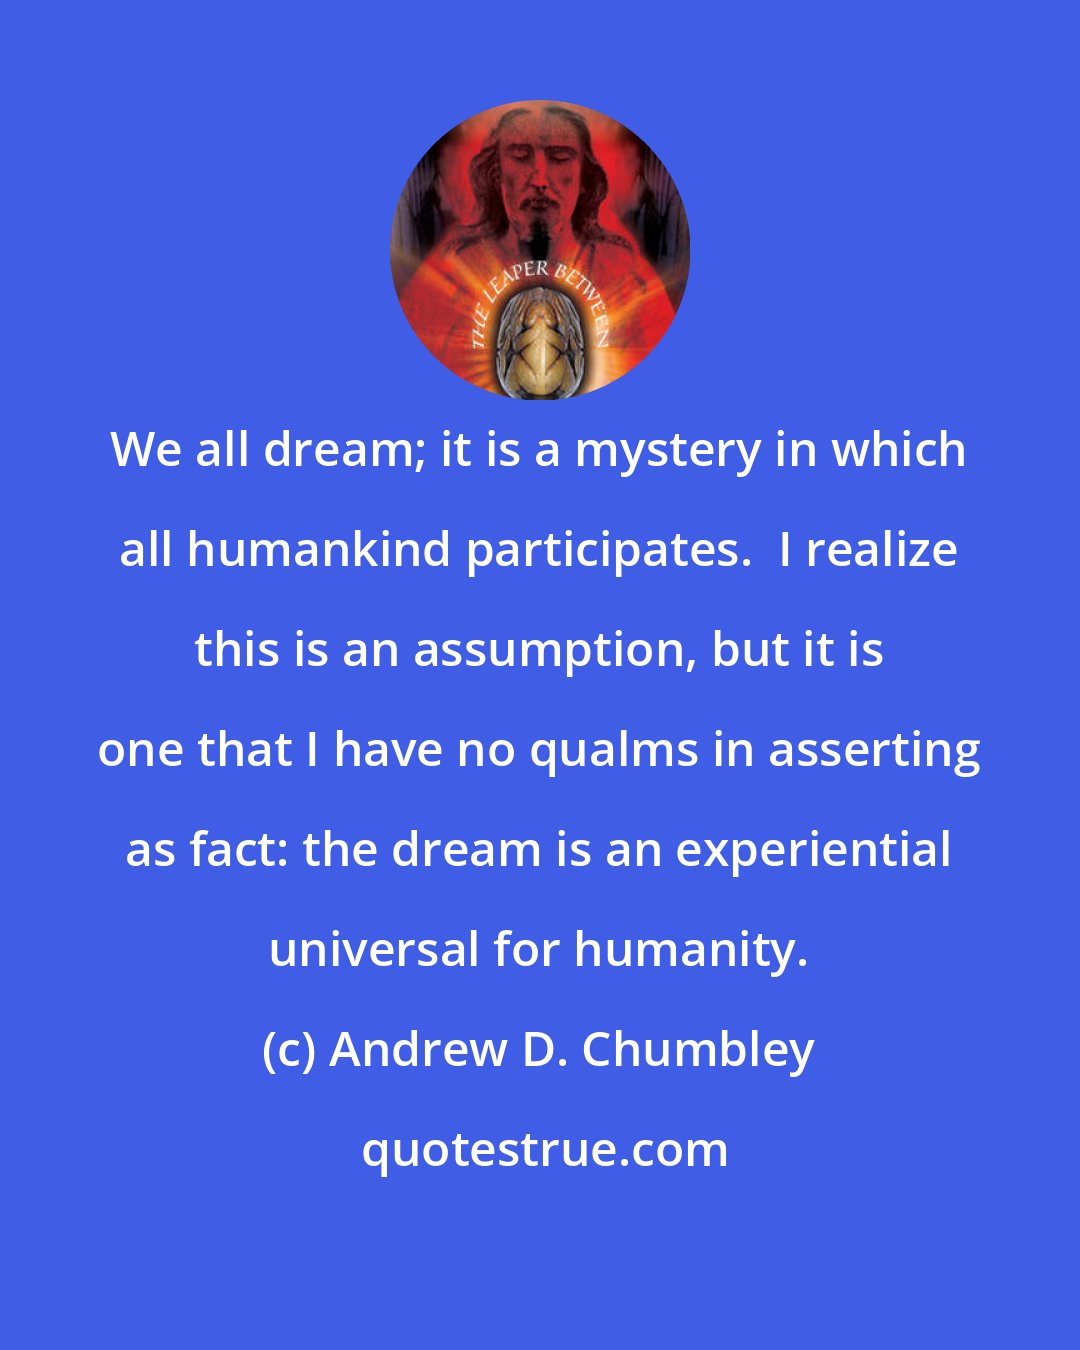 Andrew D. Chumbley: We all dream; it is a mystery in which all humankind participates.  I realize this is an assumption, but it is one that I have no qualms in asserting as fact: the dream is an experiential universal for humanity.